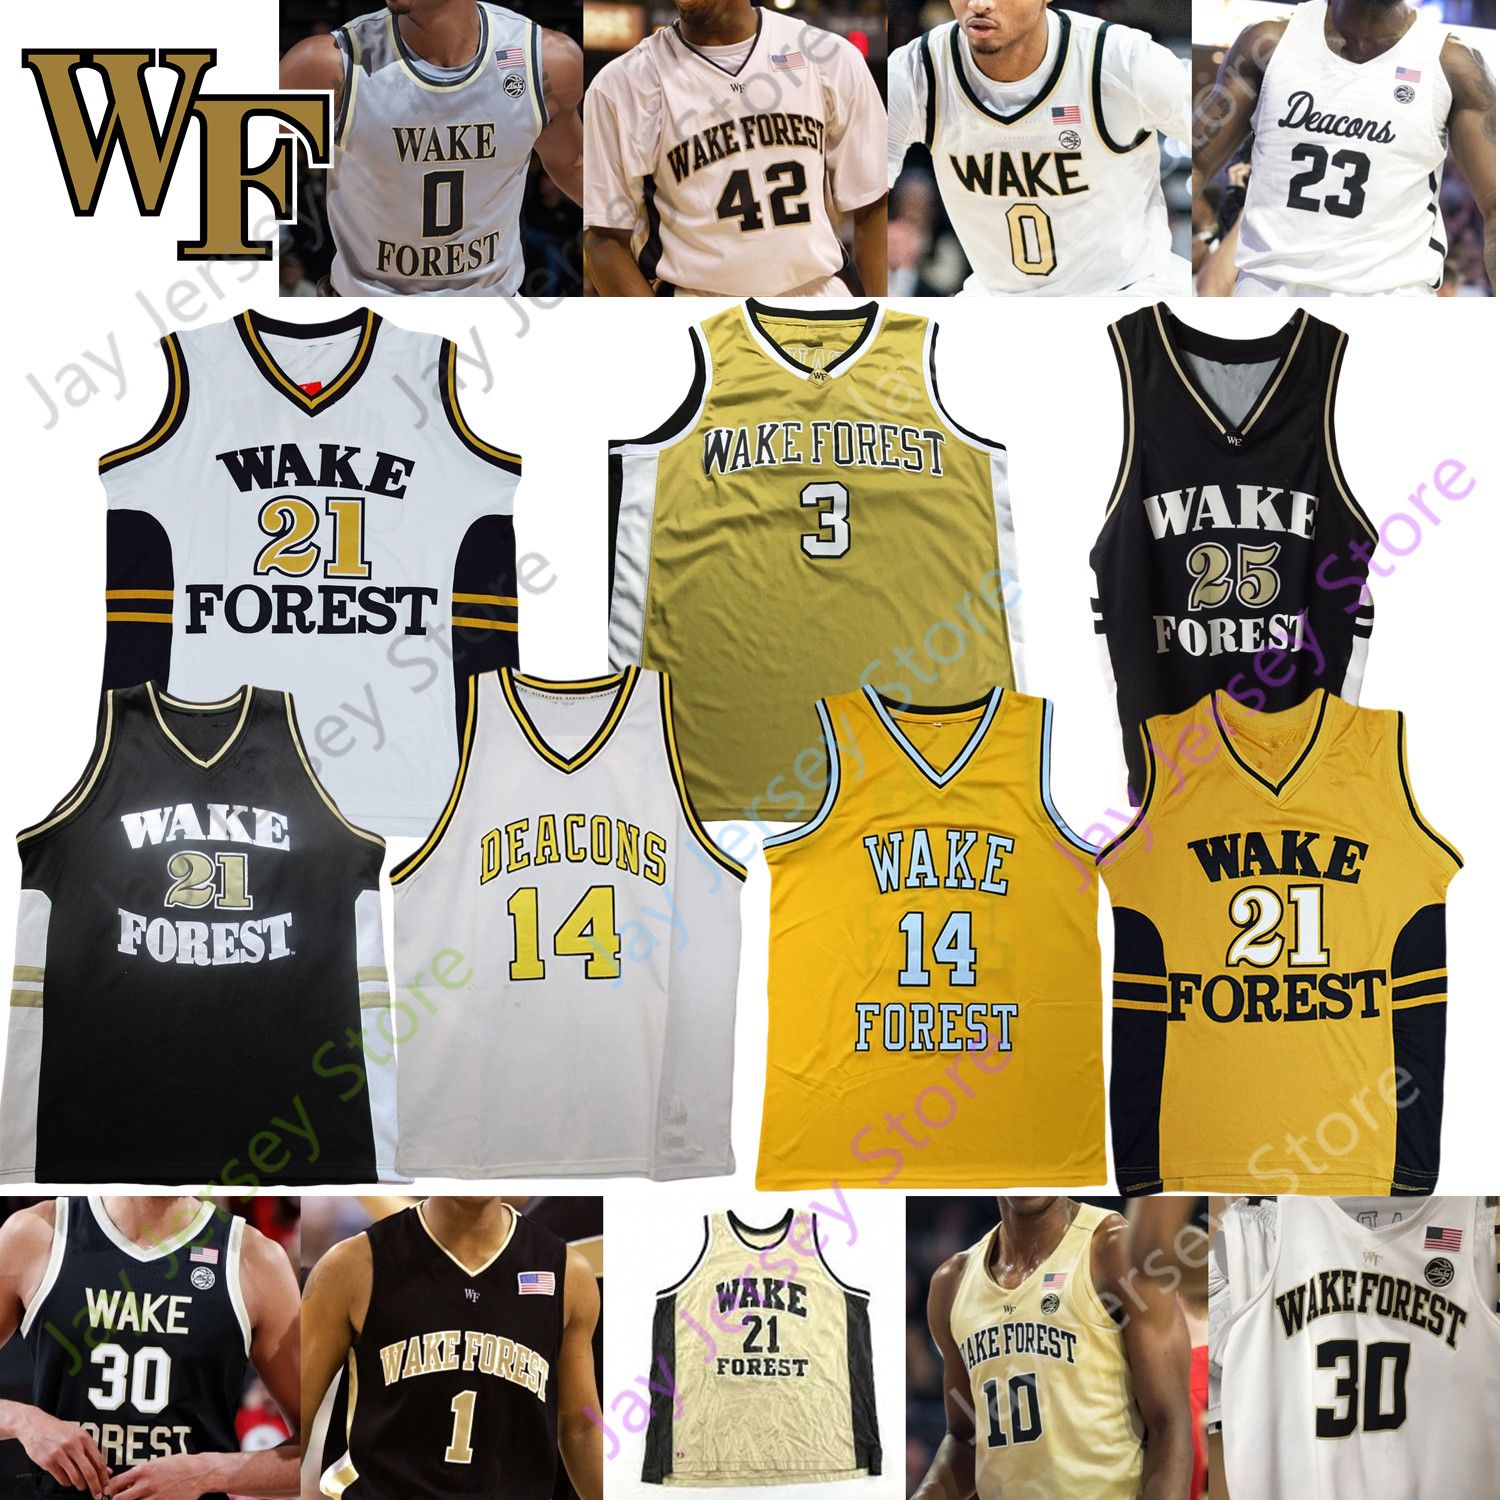 muggsy bogues wake forest jersey